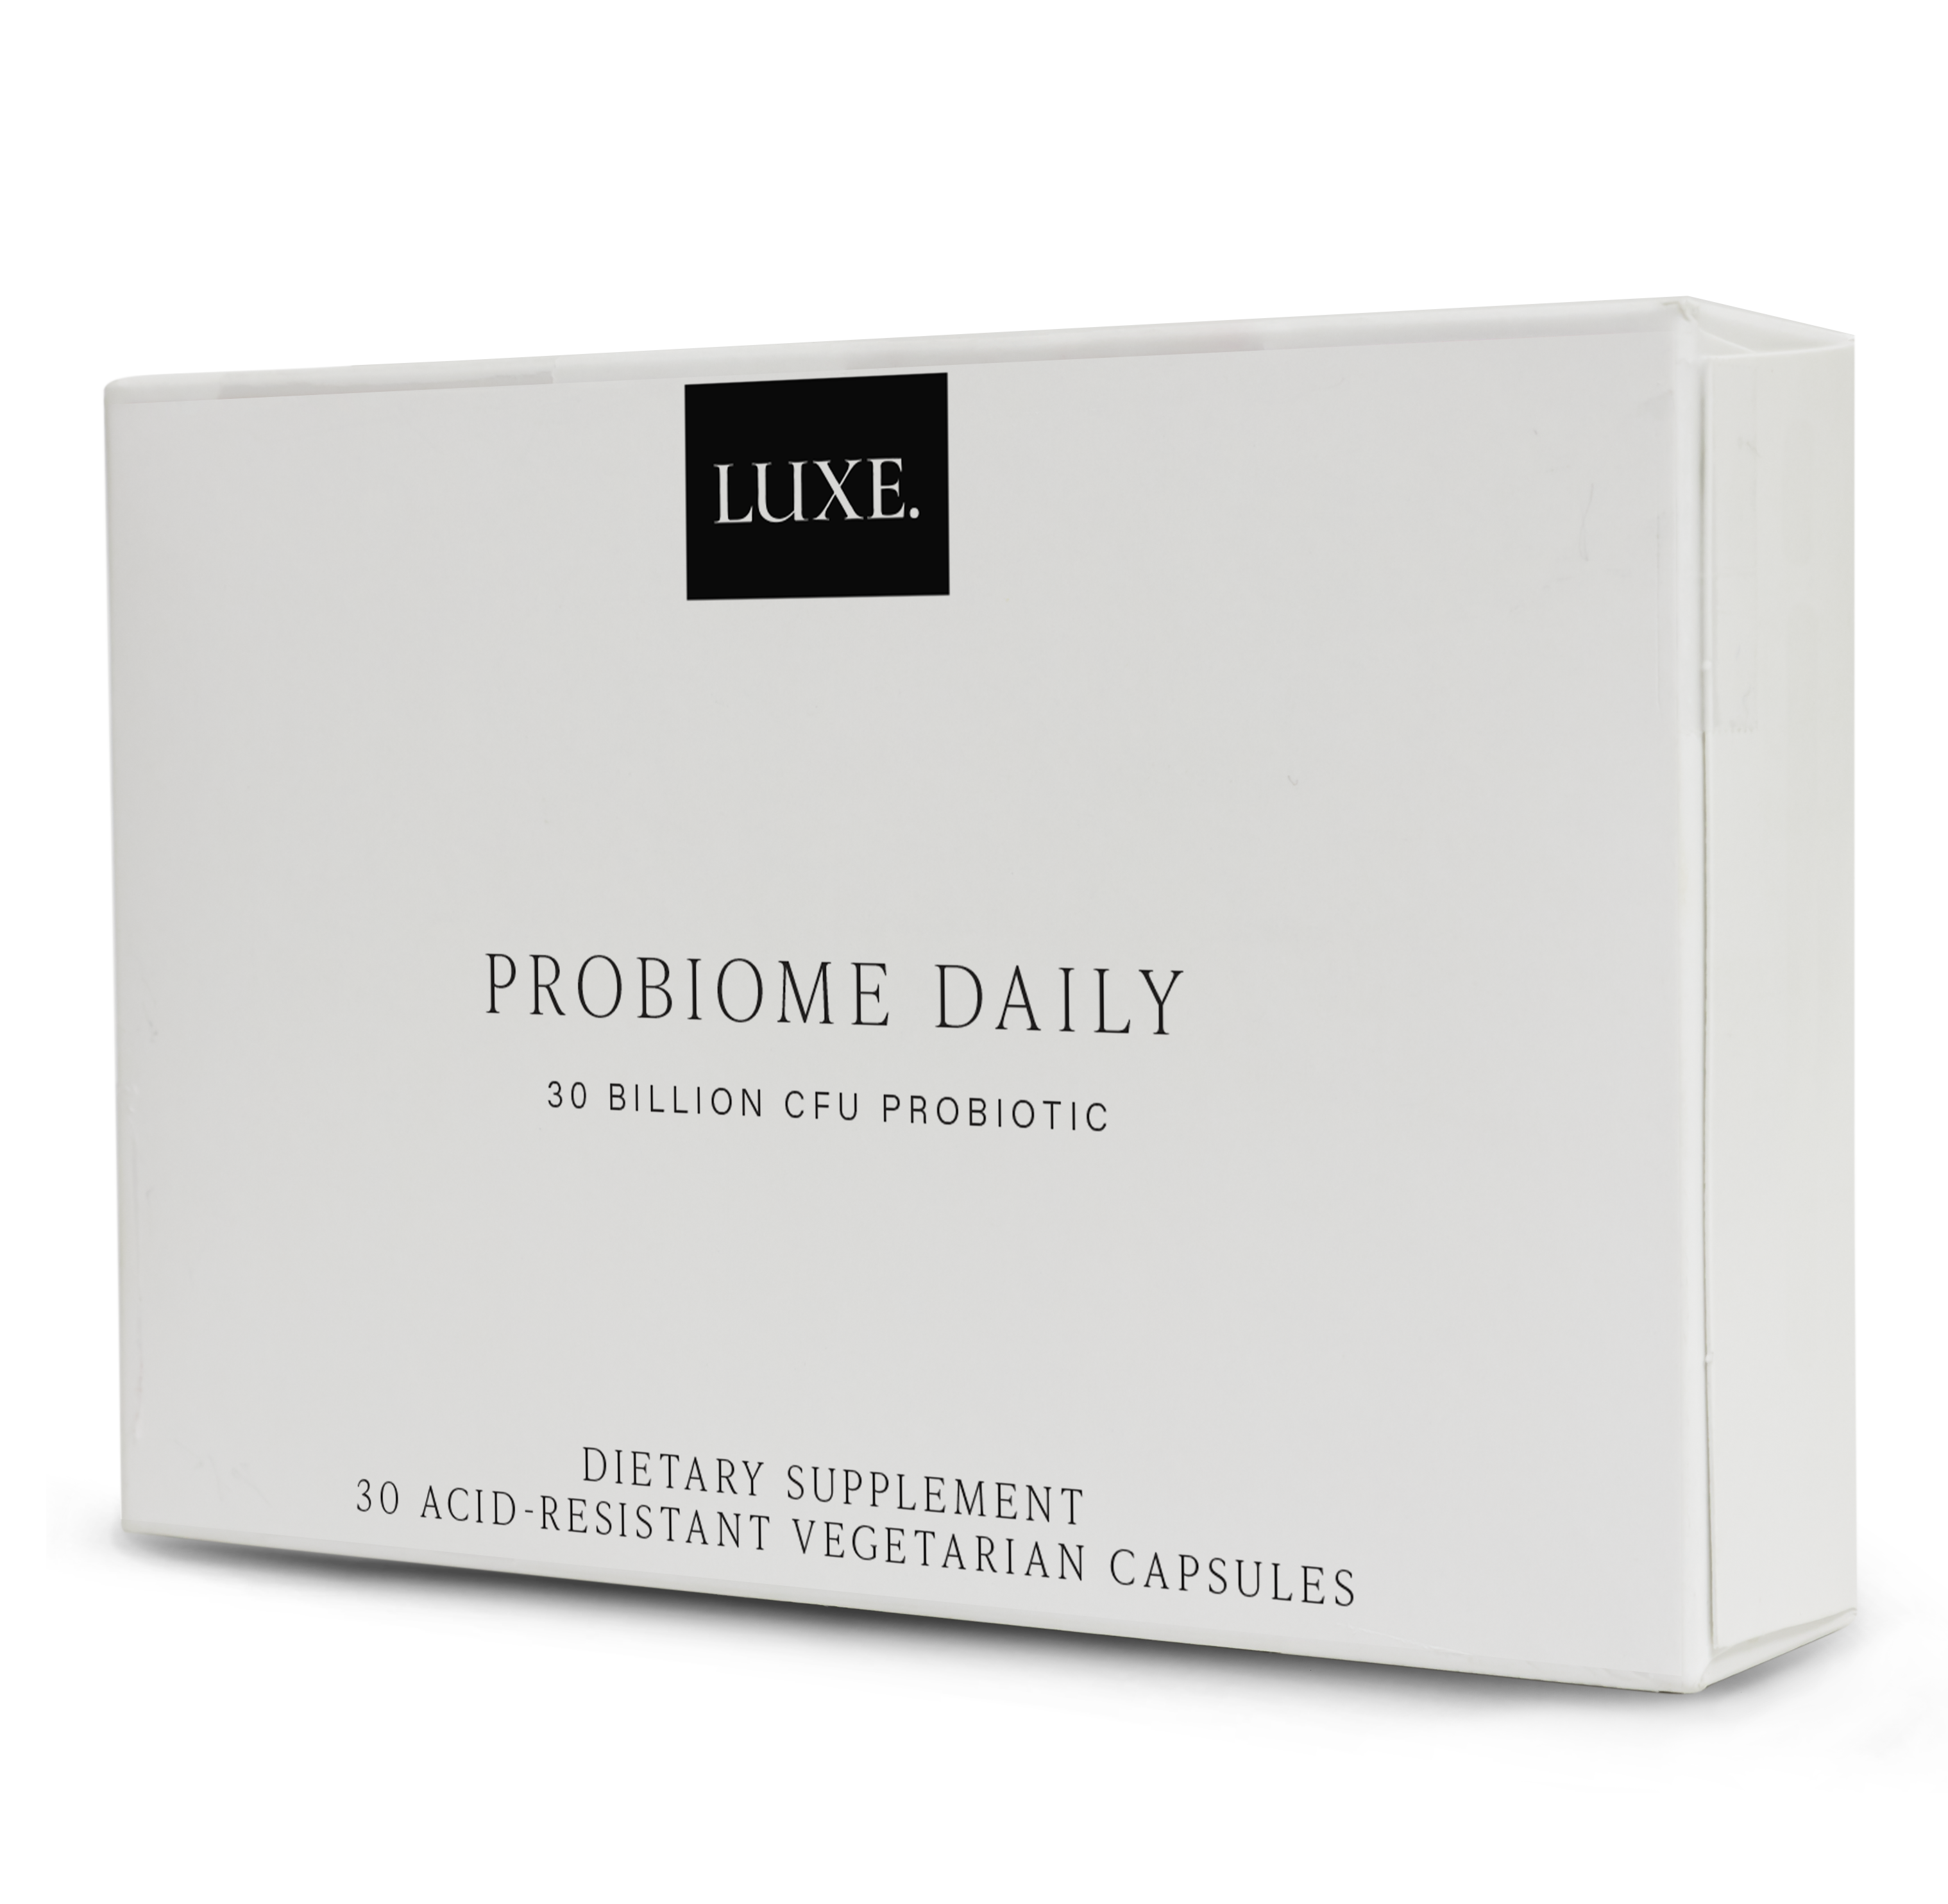 LUXE., ProBiome Daily